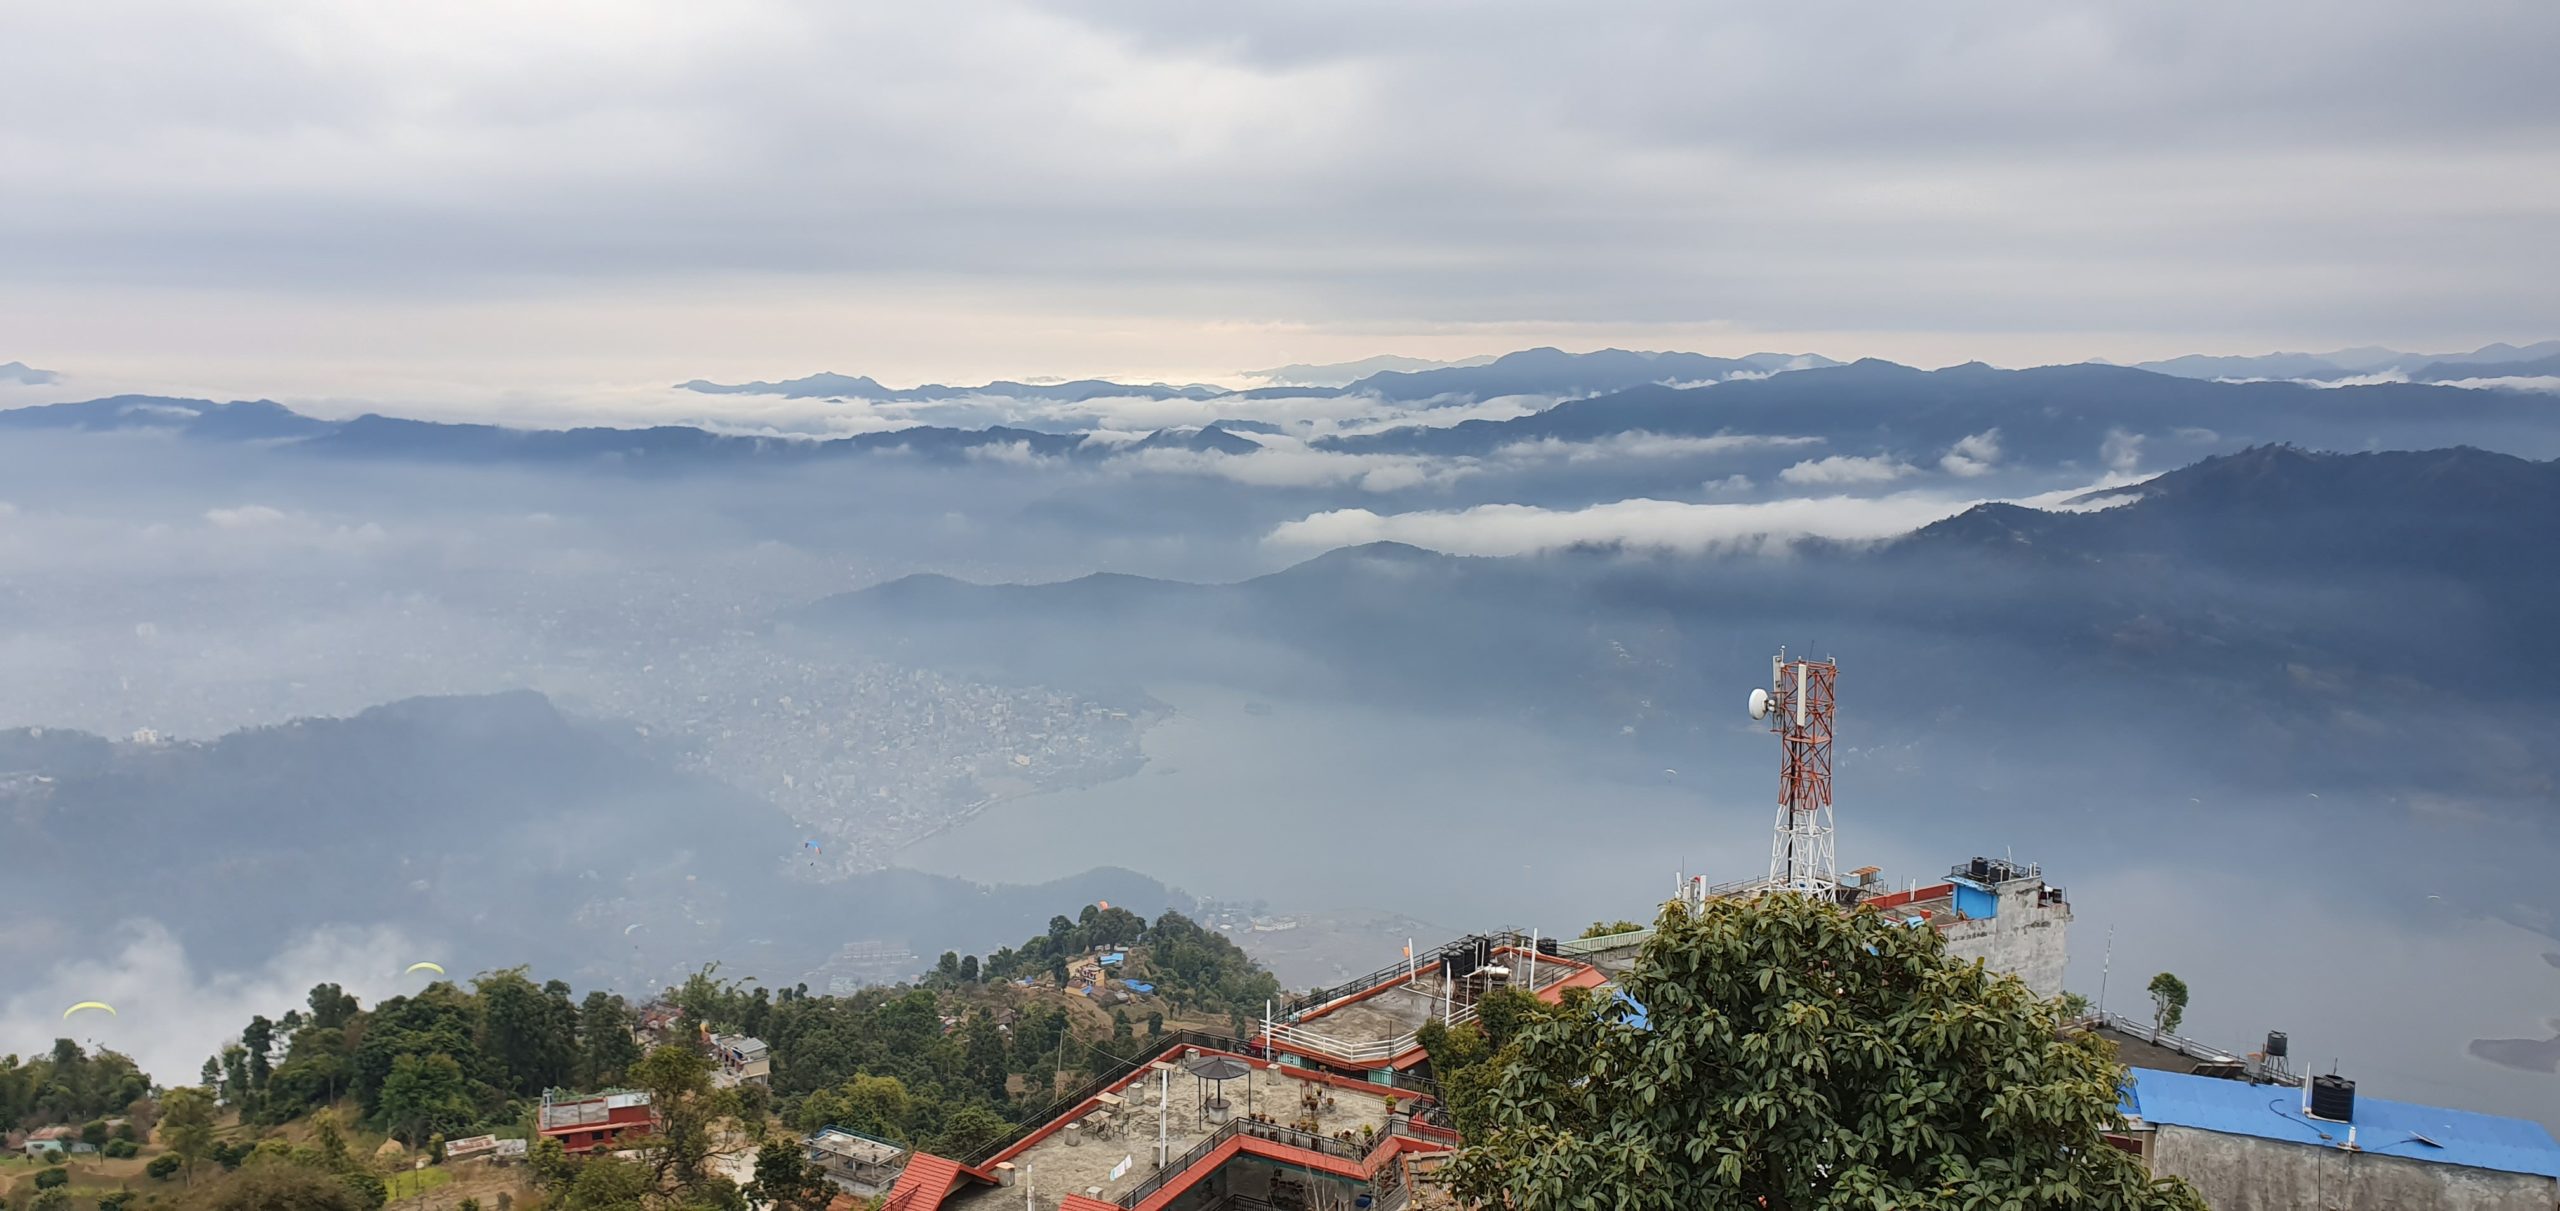 7 Best Places To Visit in Pokhara